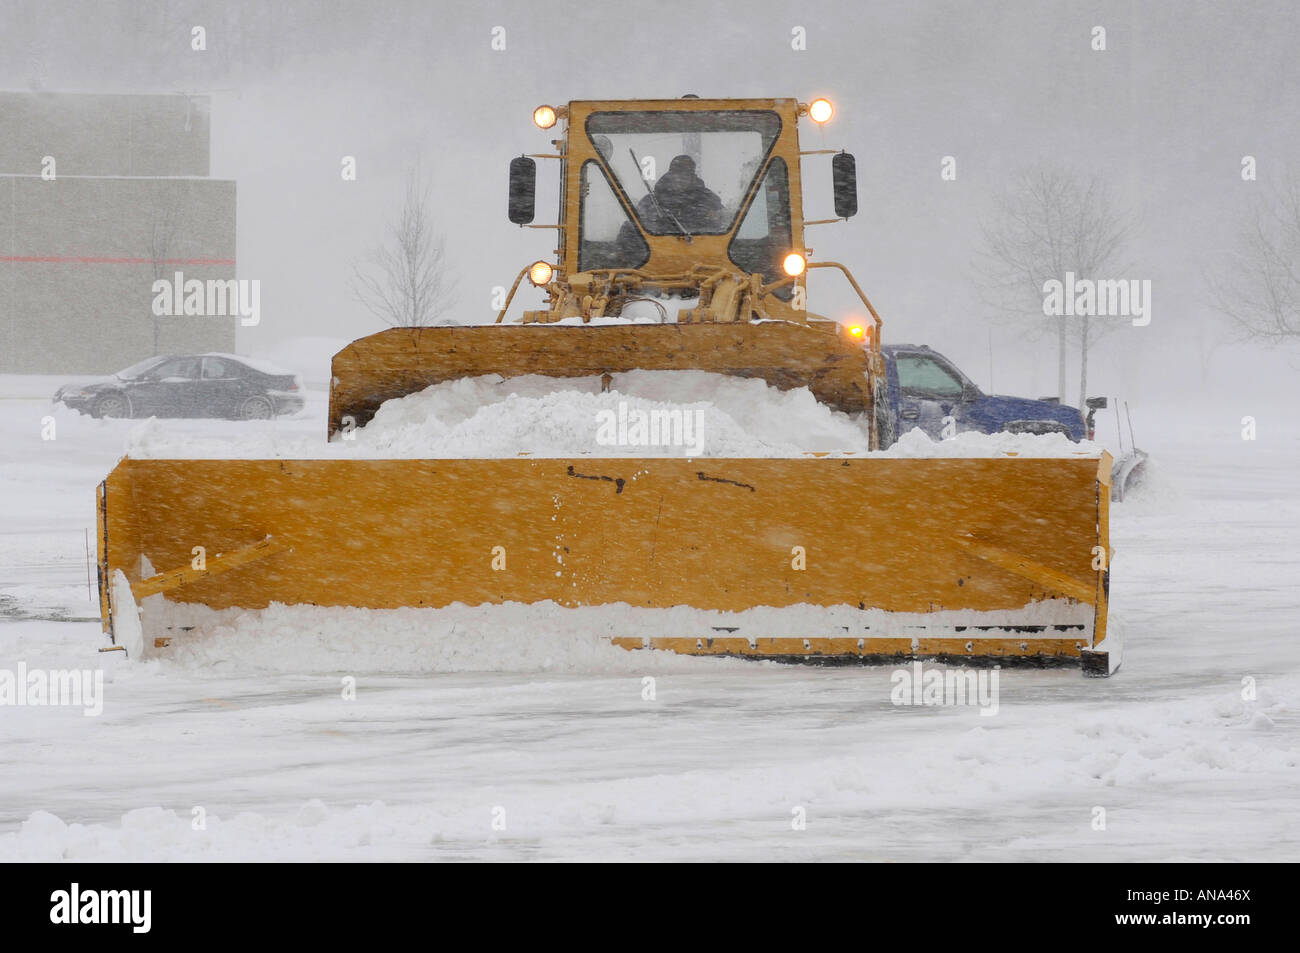 Snow plow busy clearing streets and roads during Winter season in the suburbs of Detroit Michigan Stock Photo